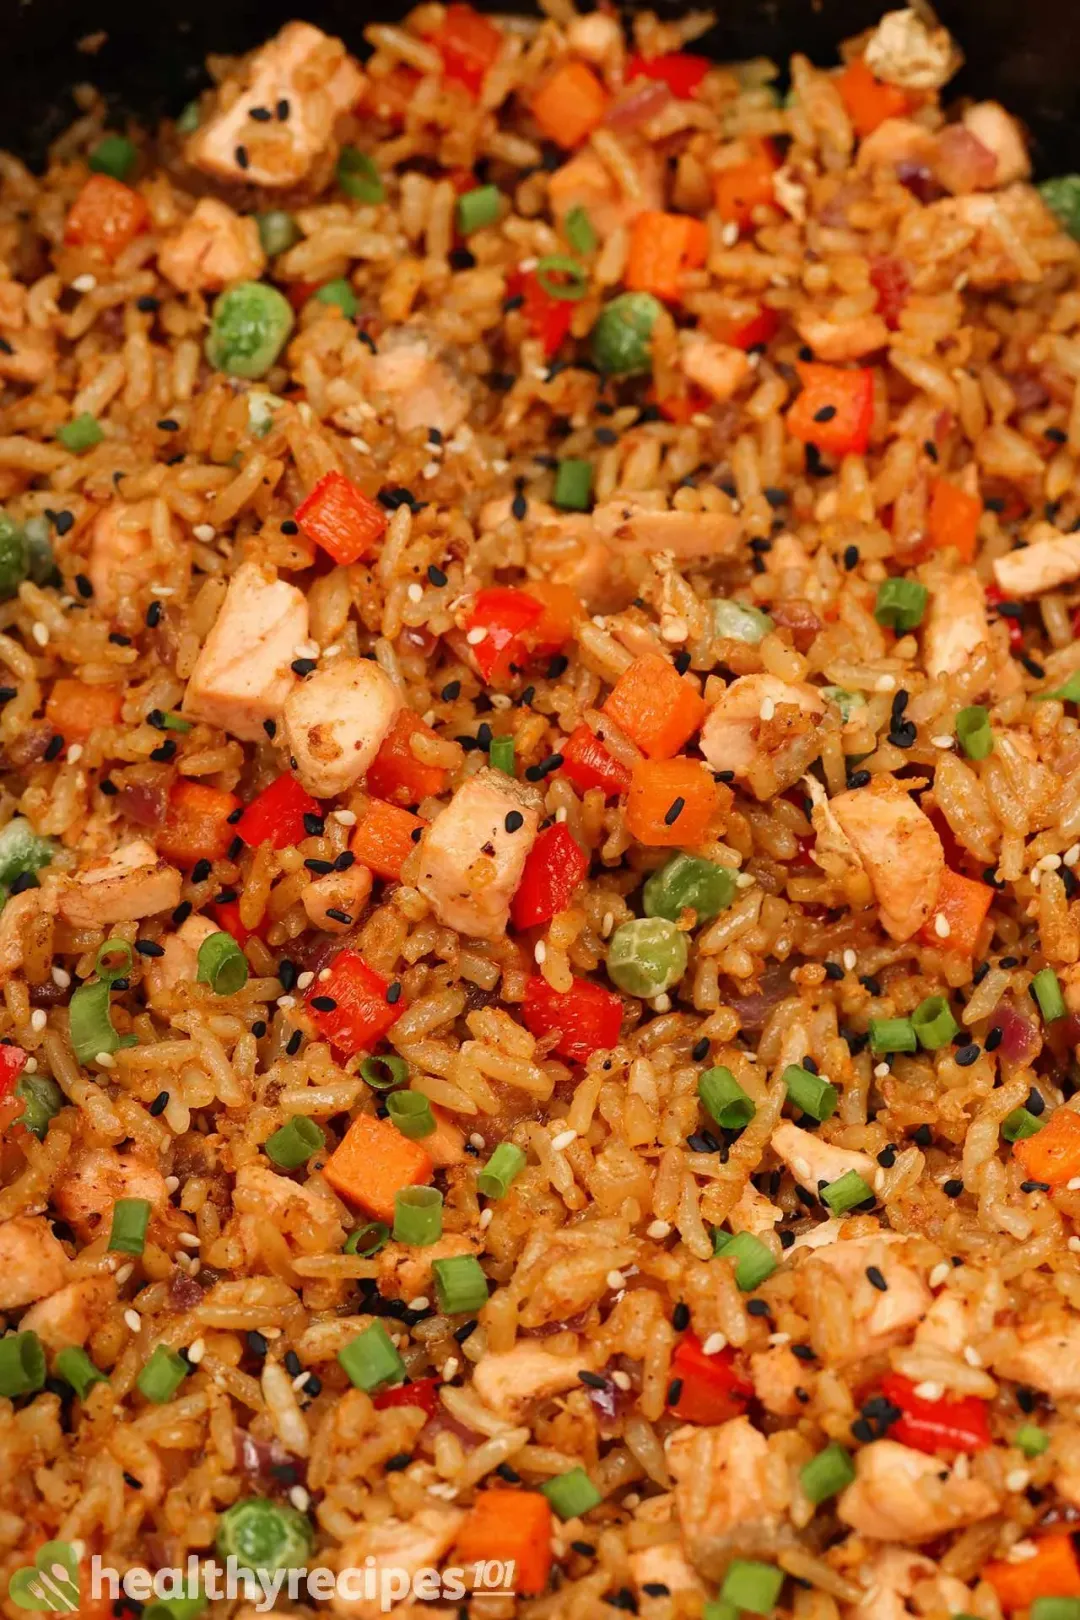 A skillet of golden brown fried rice speckled with peas, carrots, peppers, and salmon cubes